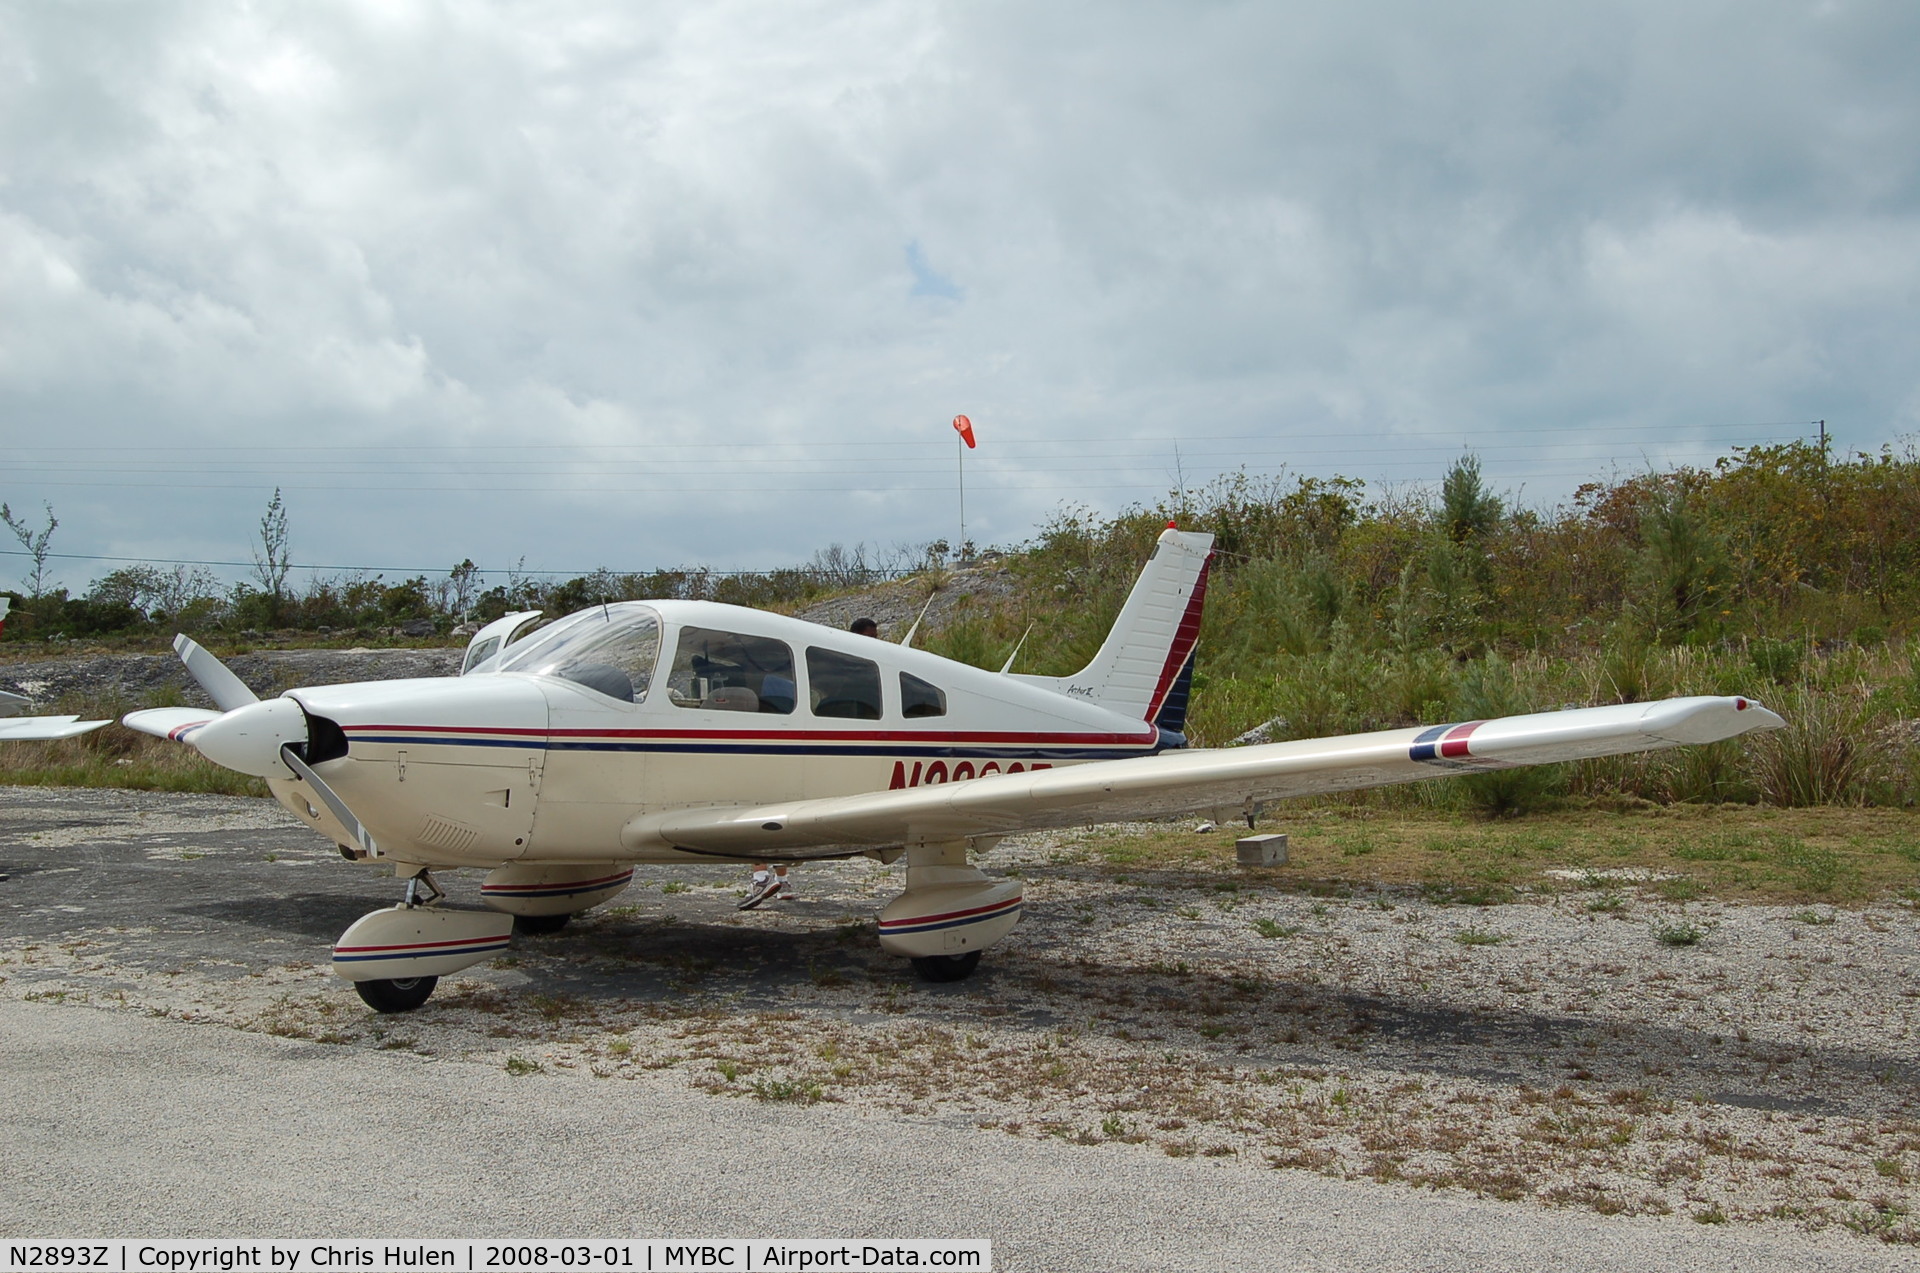 N2893Z, Piper PA-28-181 C/N 28-7990533, Resting after an island hopping flight in the Bahamas